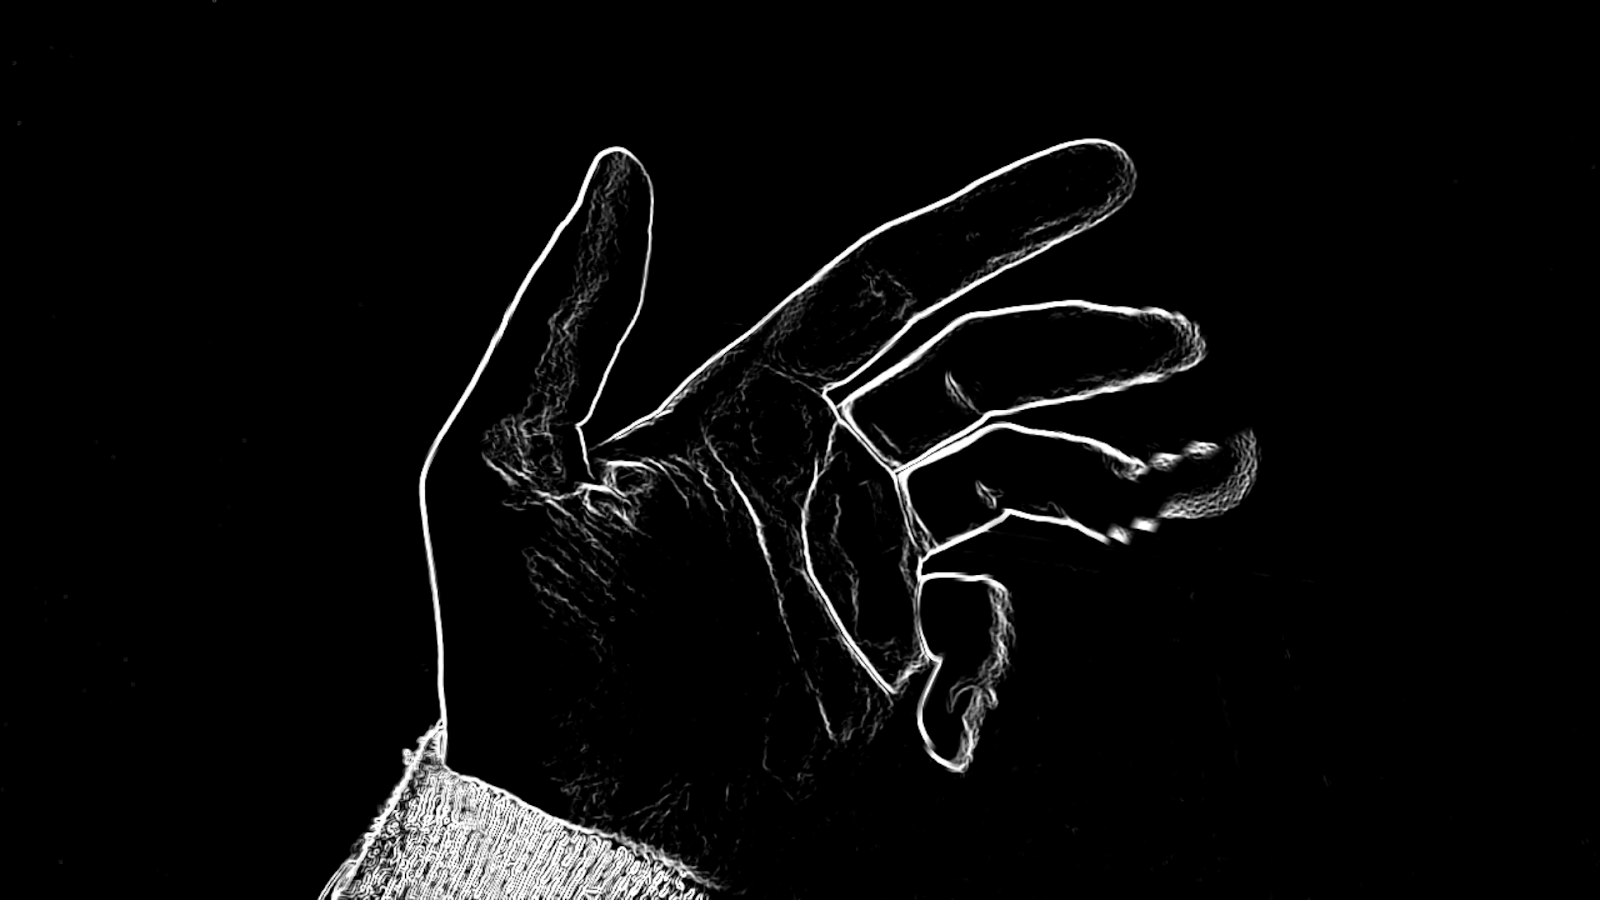 A left hand, palm-side up, is rendered in a hand-drawn style with white lines on a black background. The fourth and fifth fingers are warped and stretching with a glitch aesthetic, as if beginning to float away.